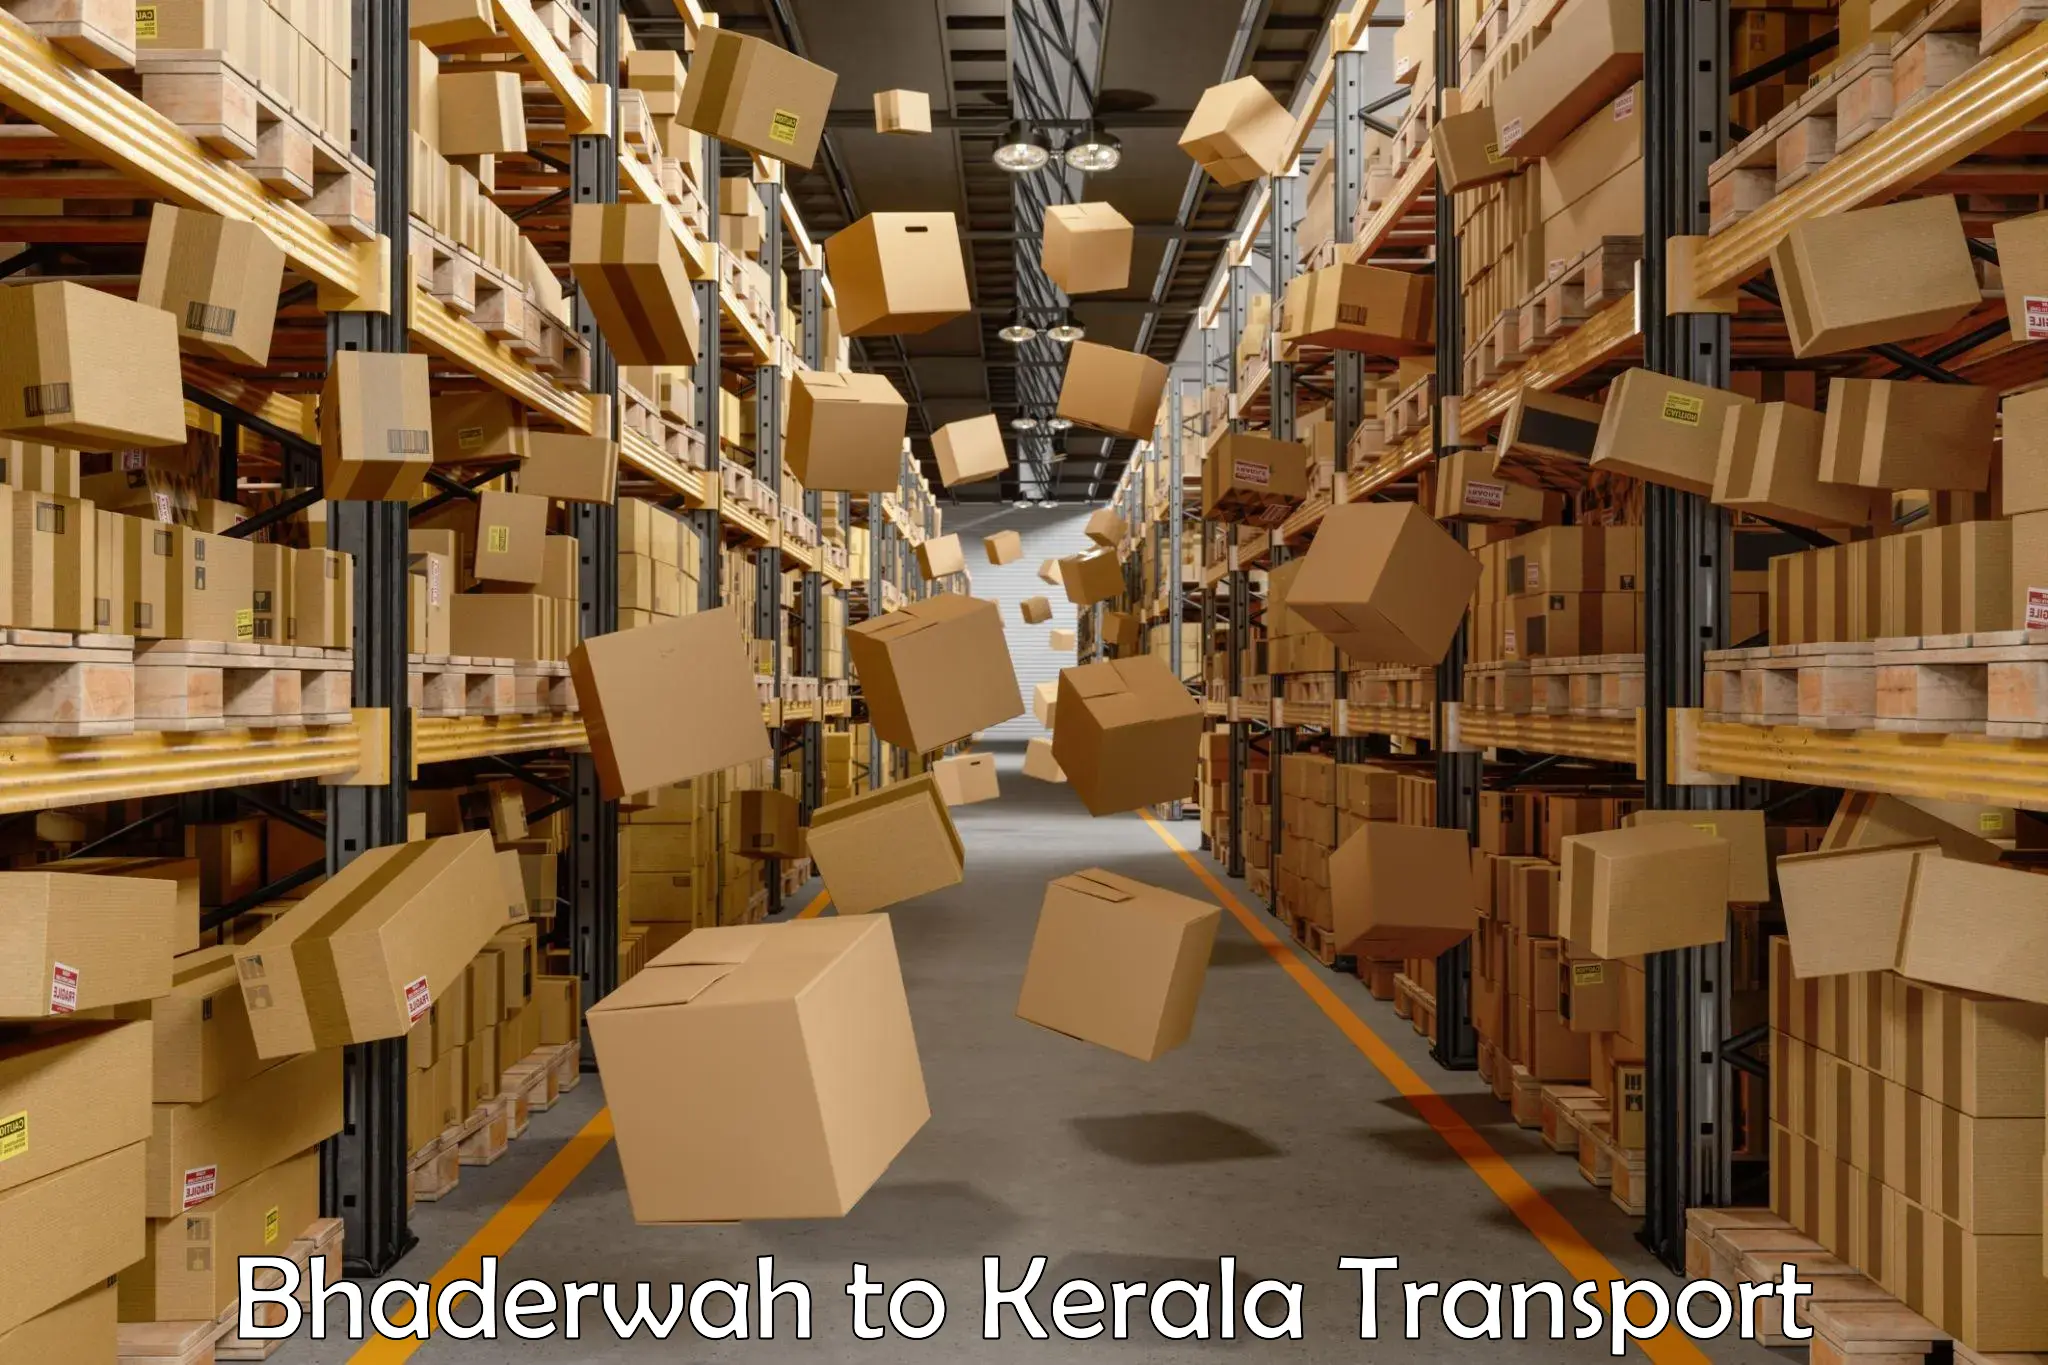 Truck transport companies in India in Bhaderwah to Kozhikode